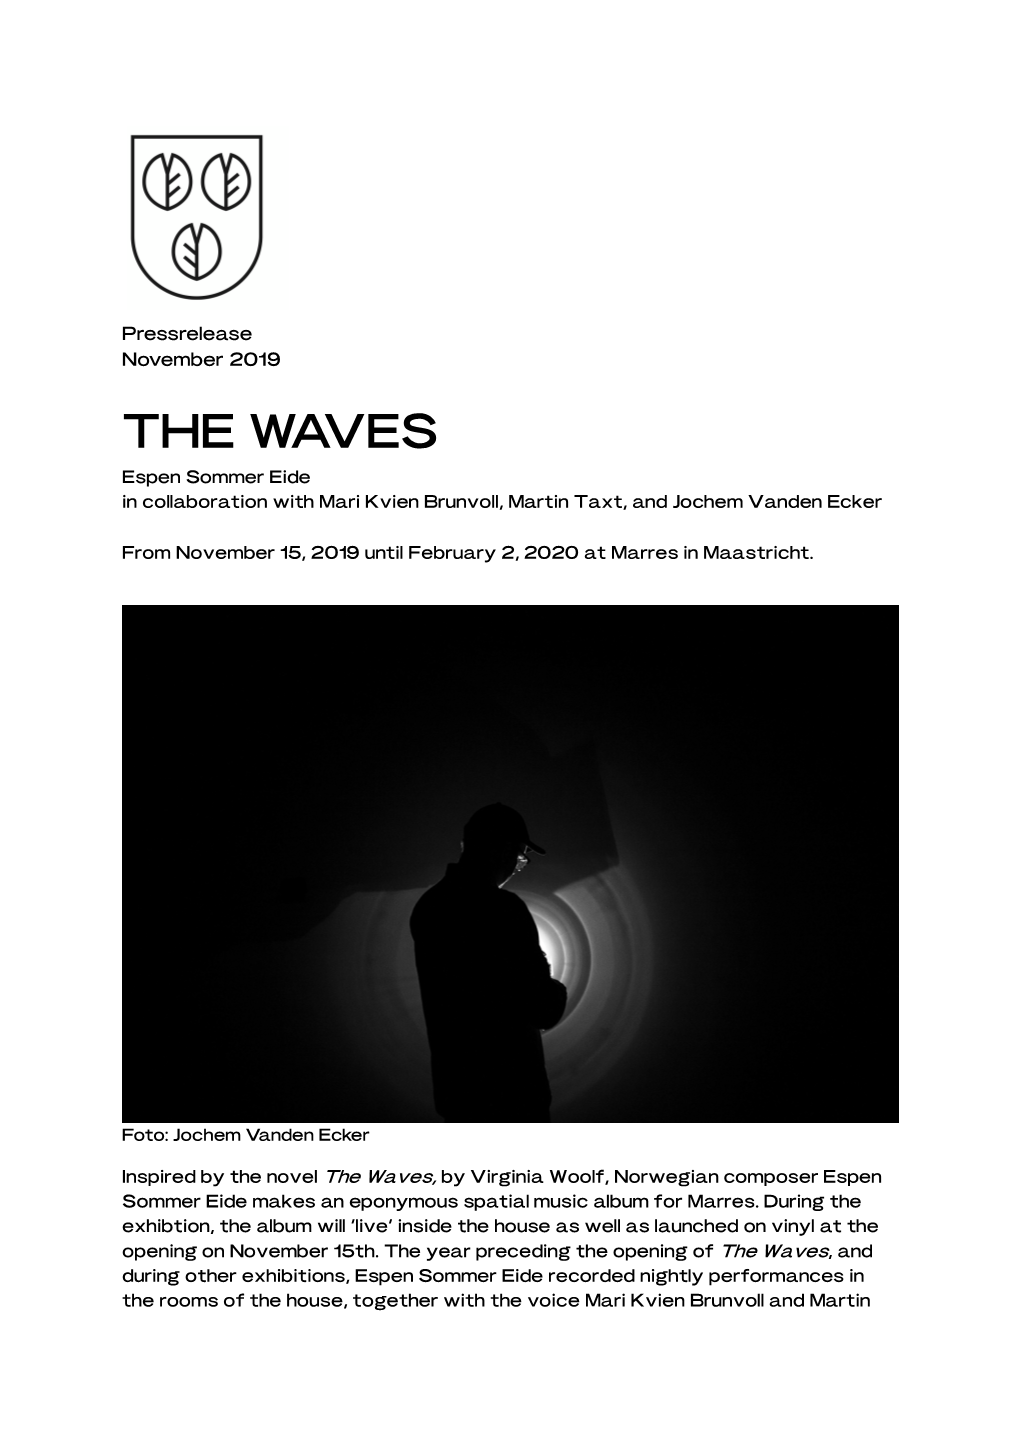 Press Release the Waves